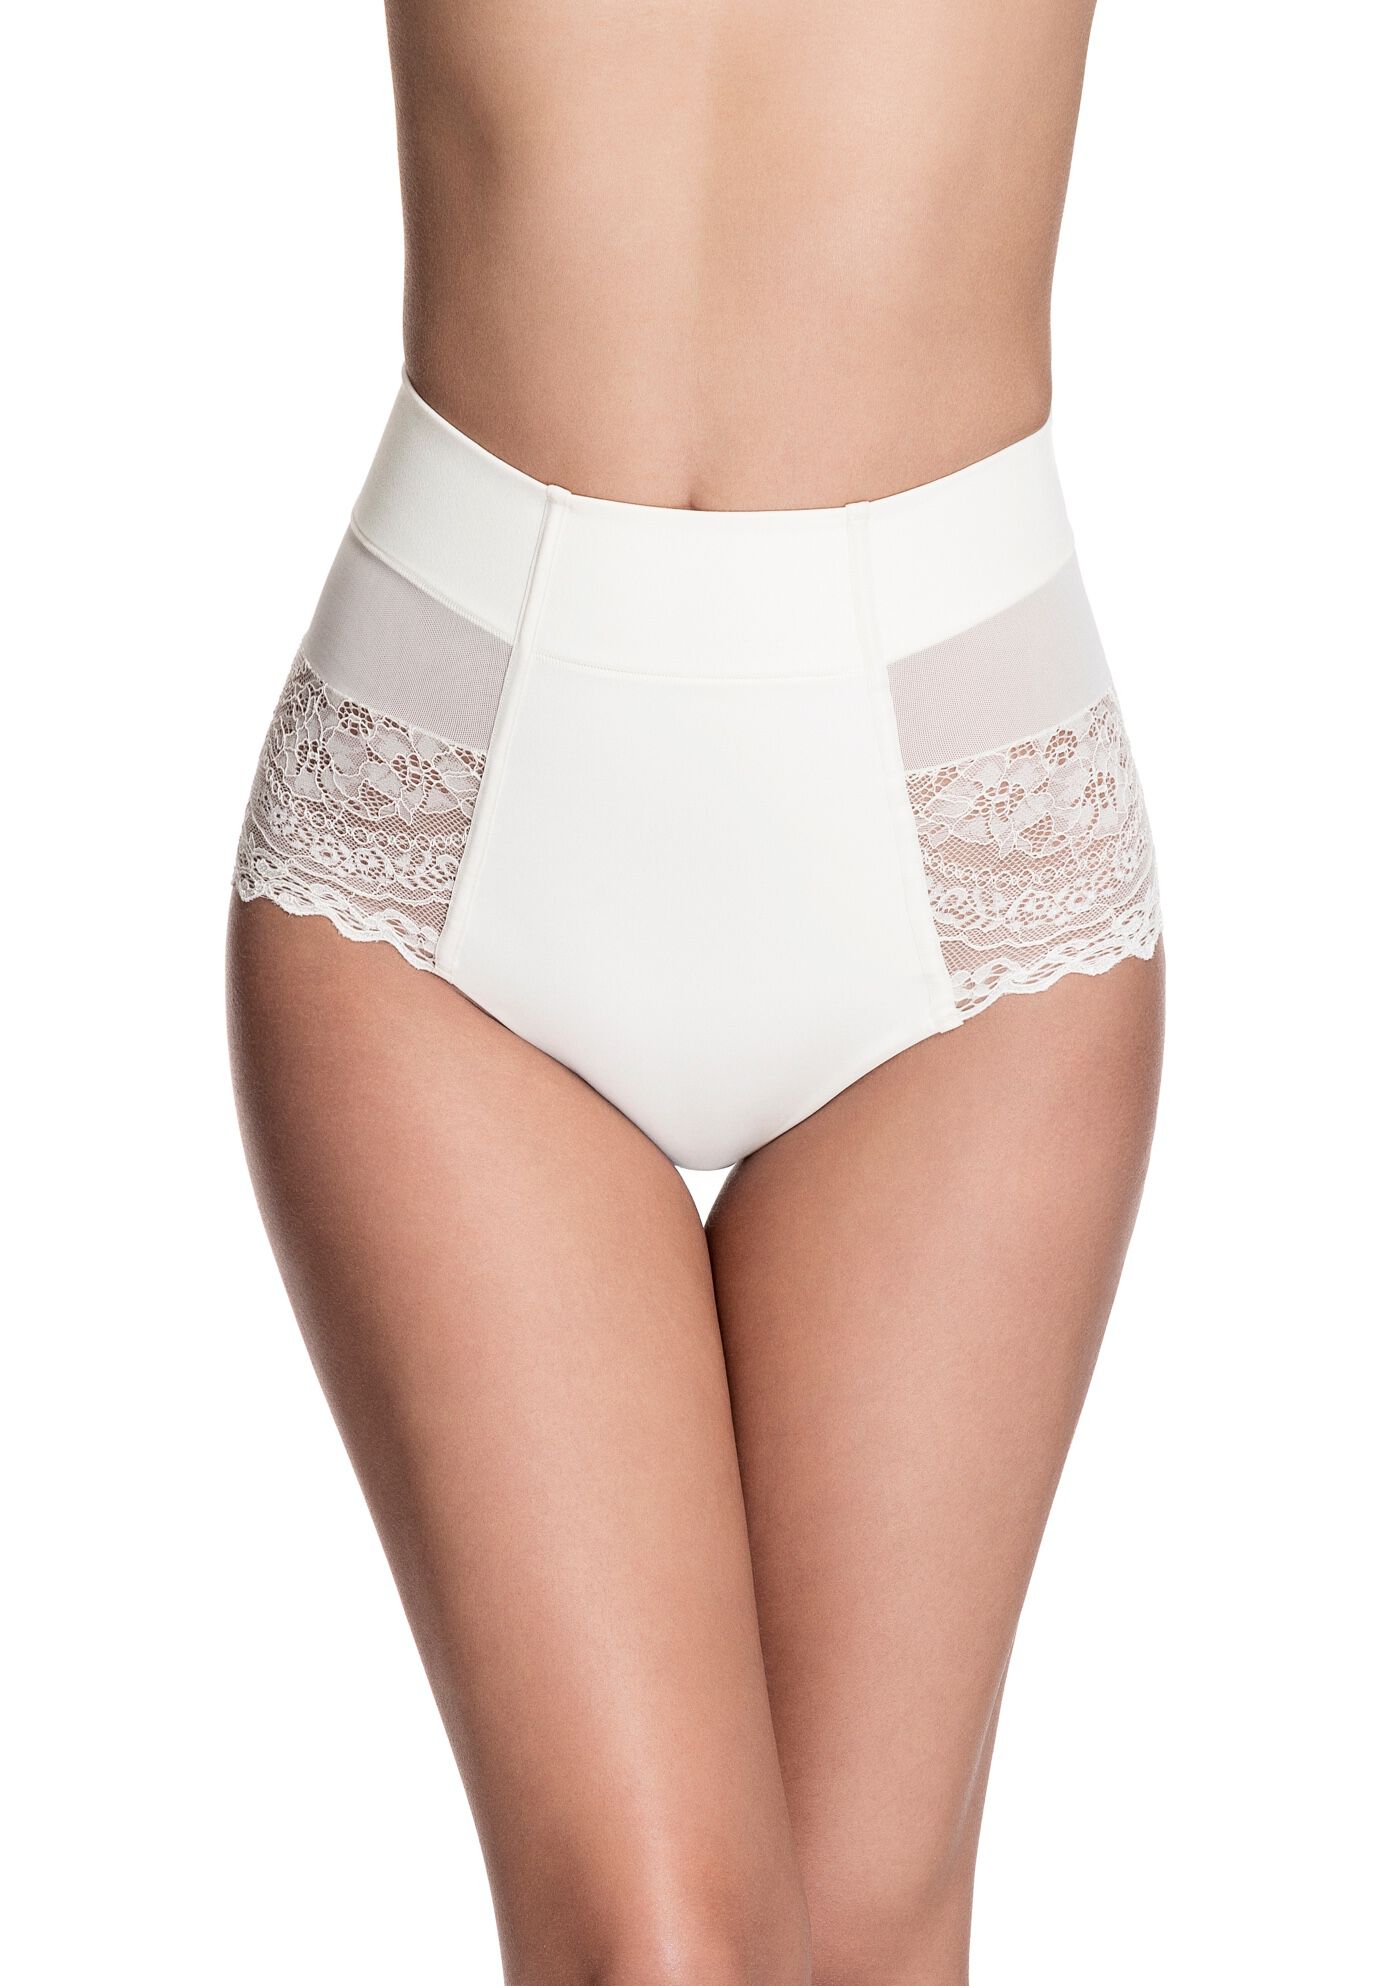 Plus Size Women's Brazilian Flair Mid Waist Brief by Squeem in Soft Ivory (Size M)